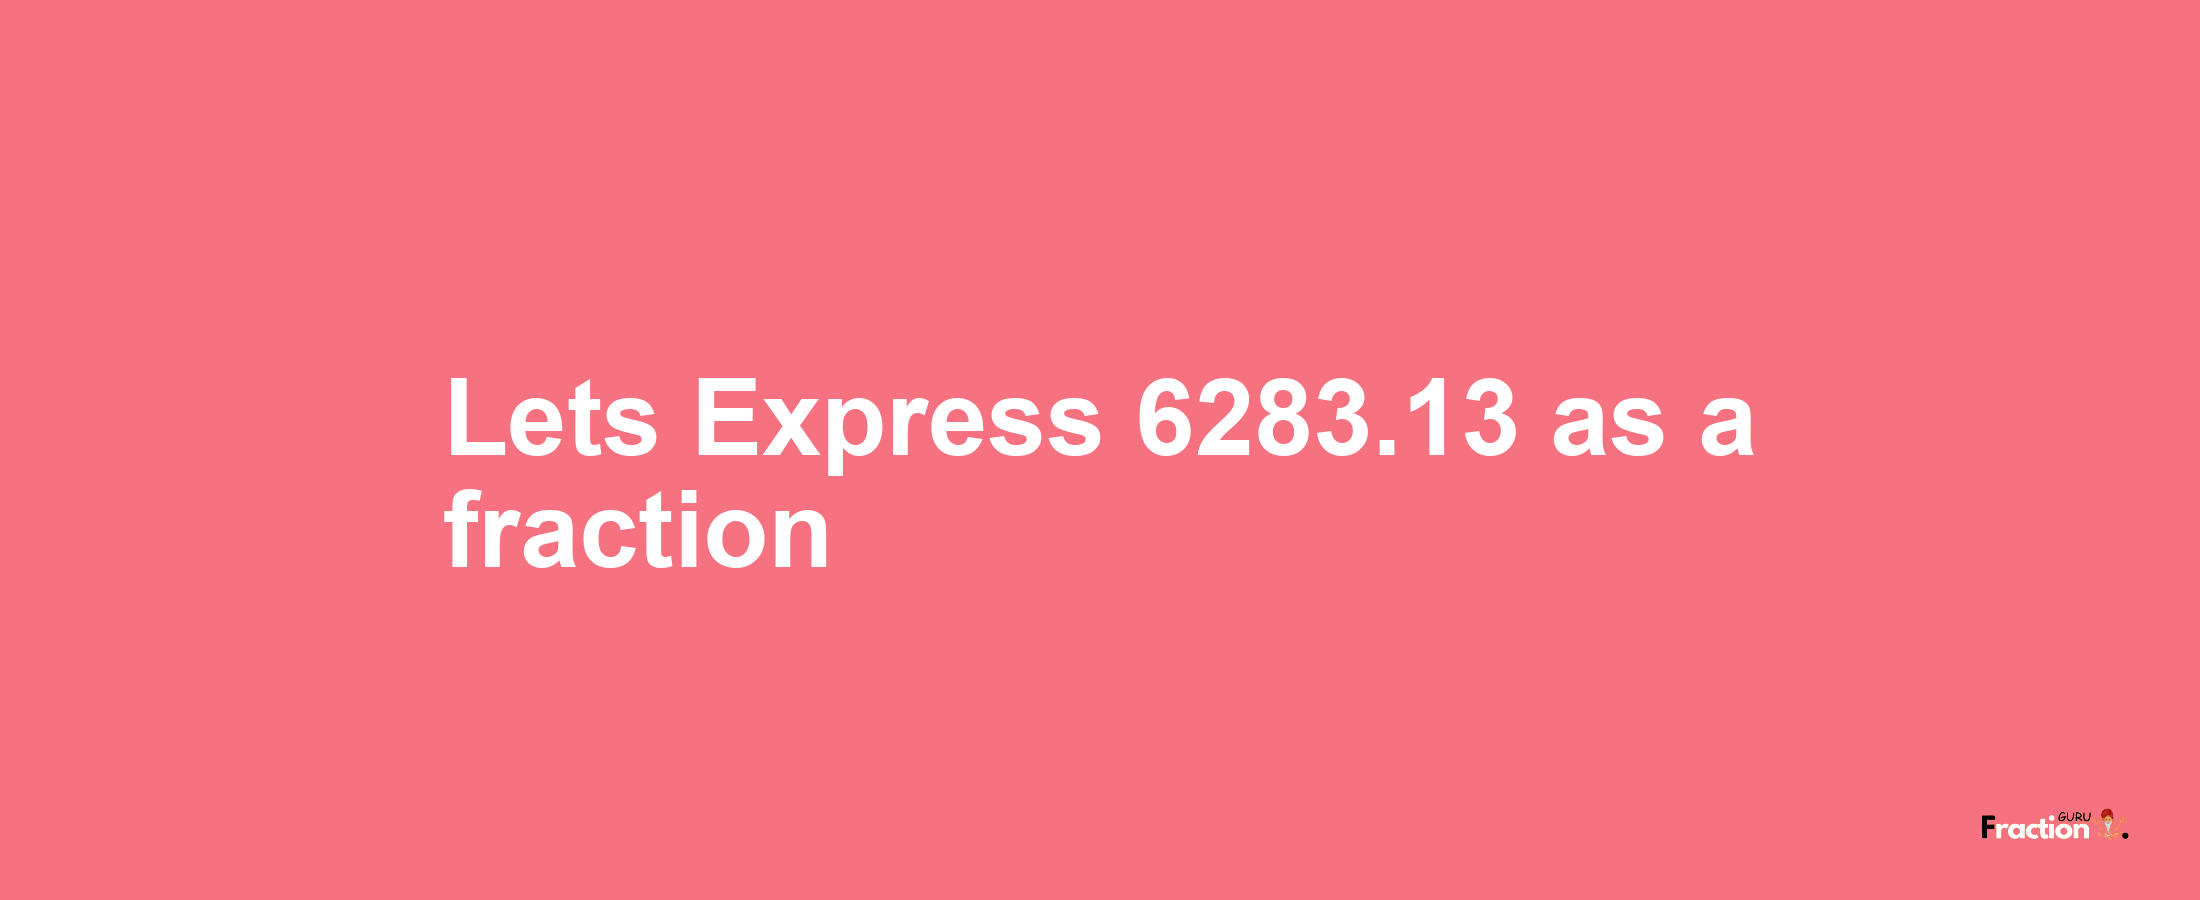 Lets Express 6283.13 as afraction